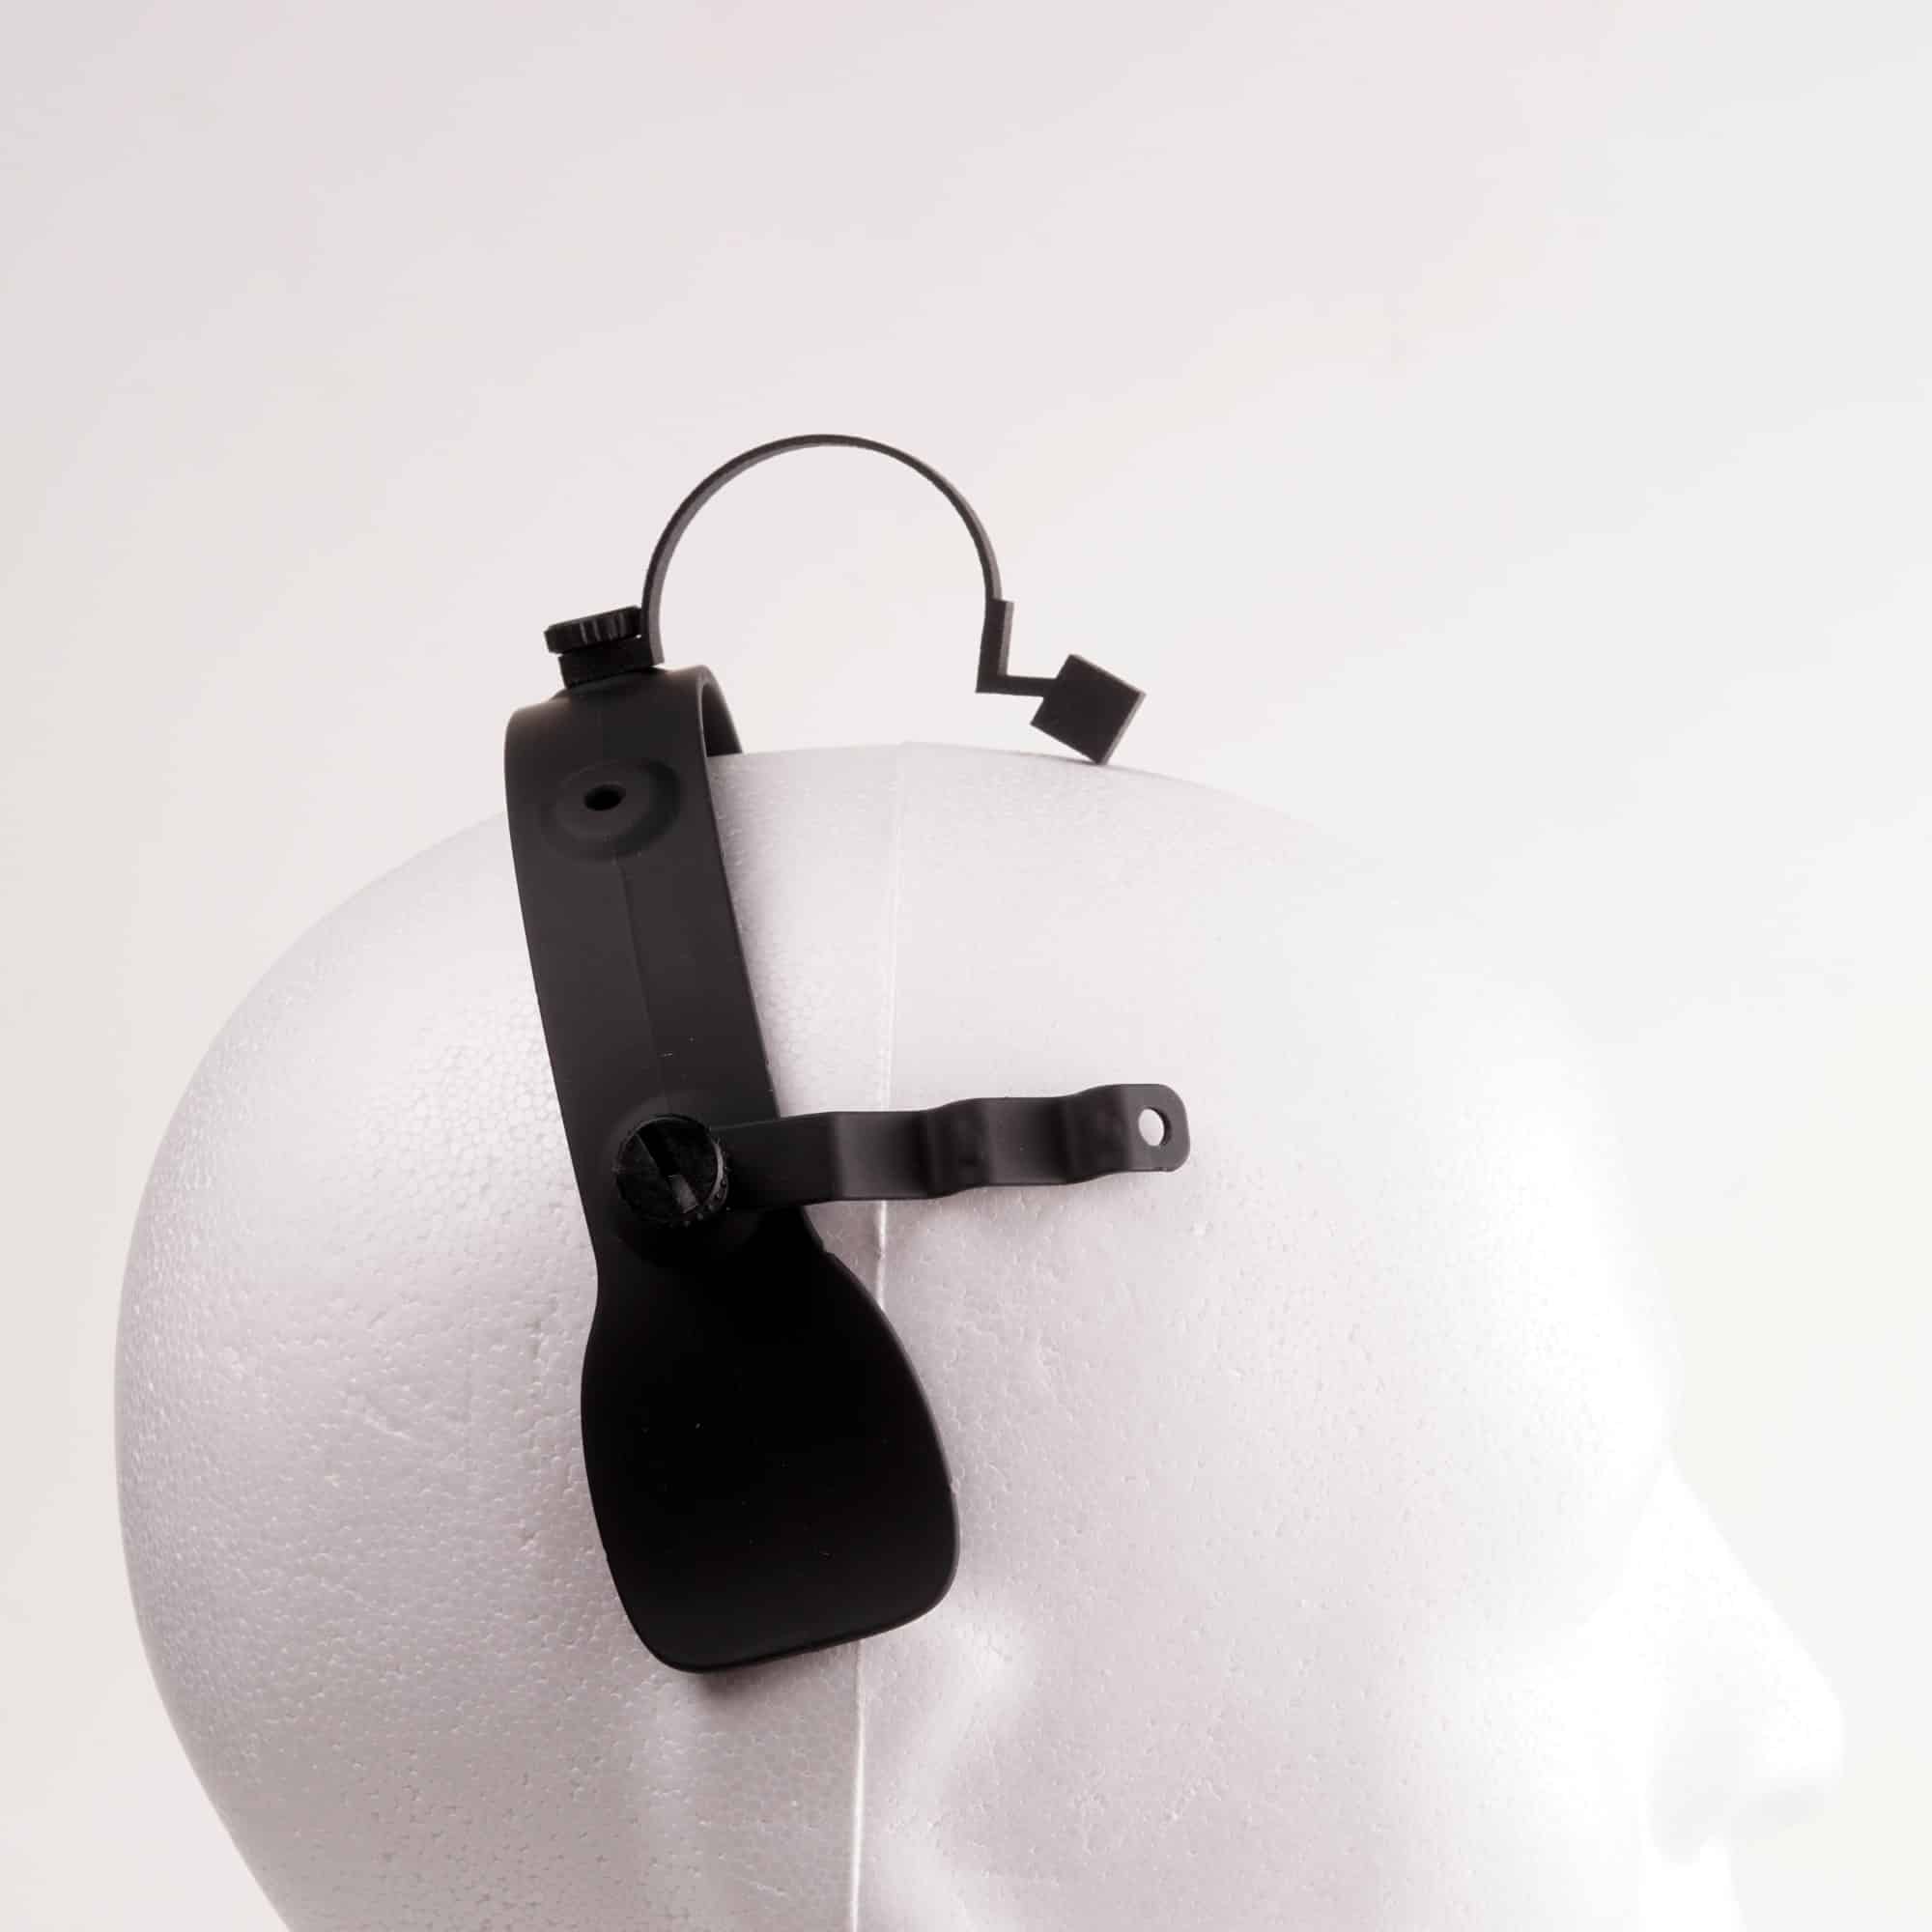 EEG Headband for attachment of Sintered Electrodes for Adults ...